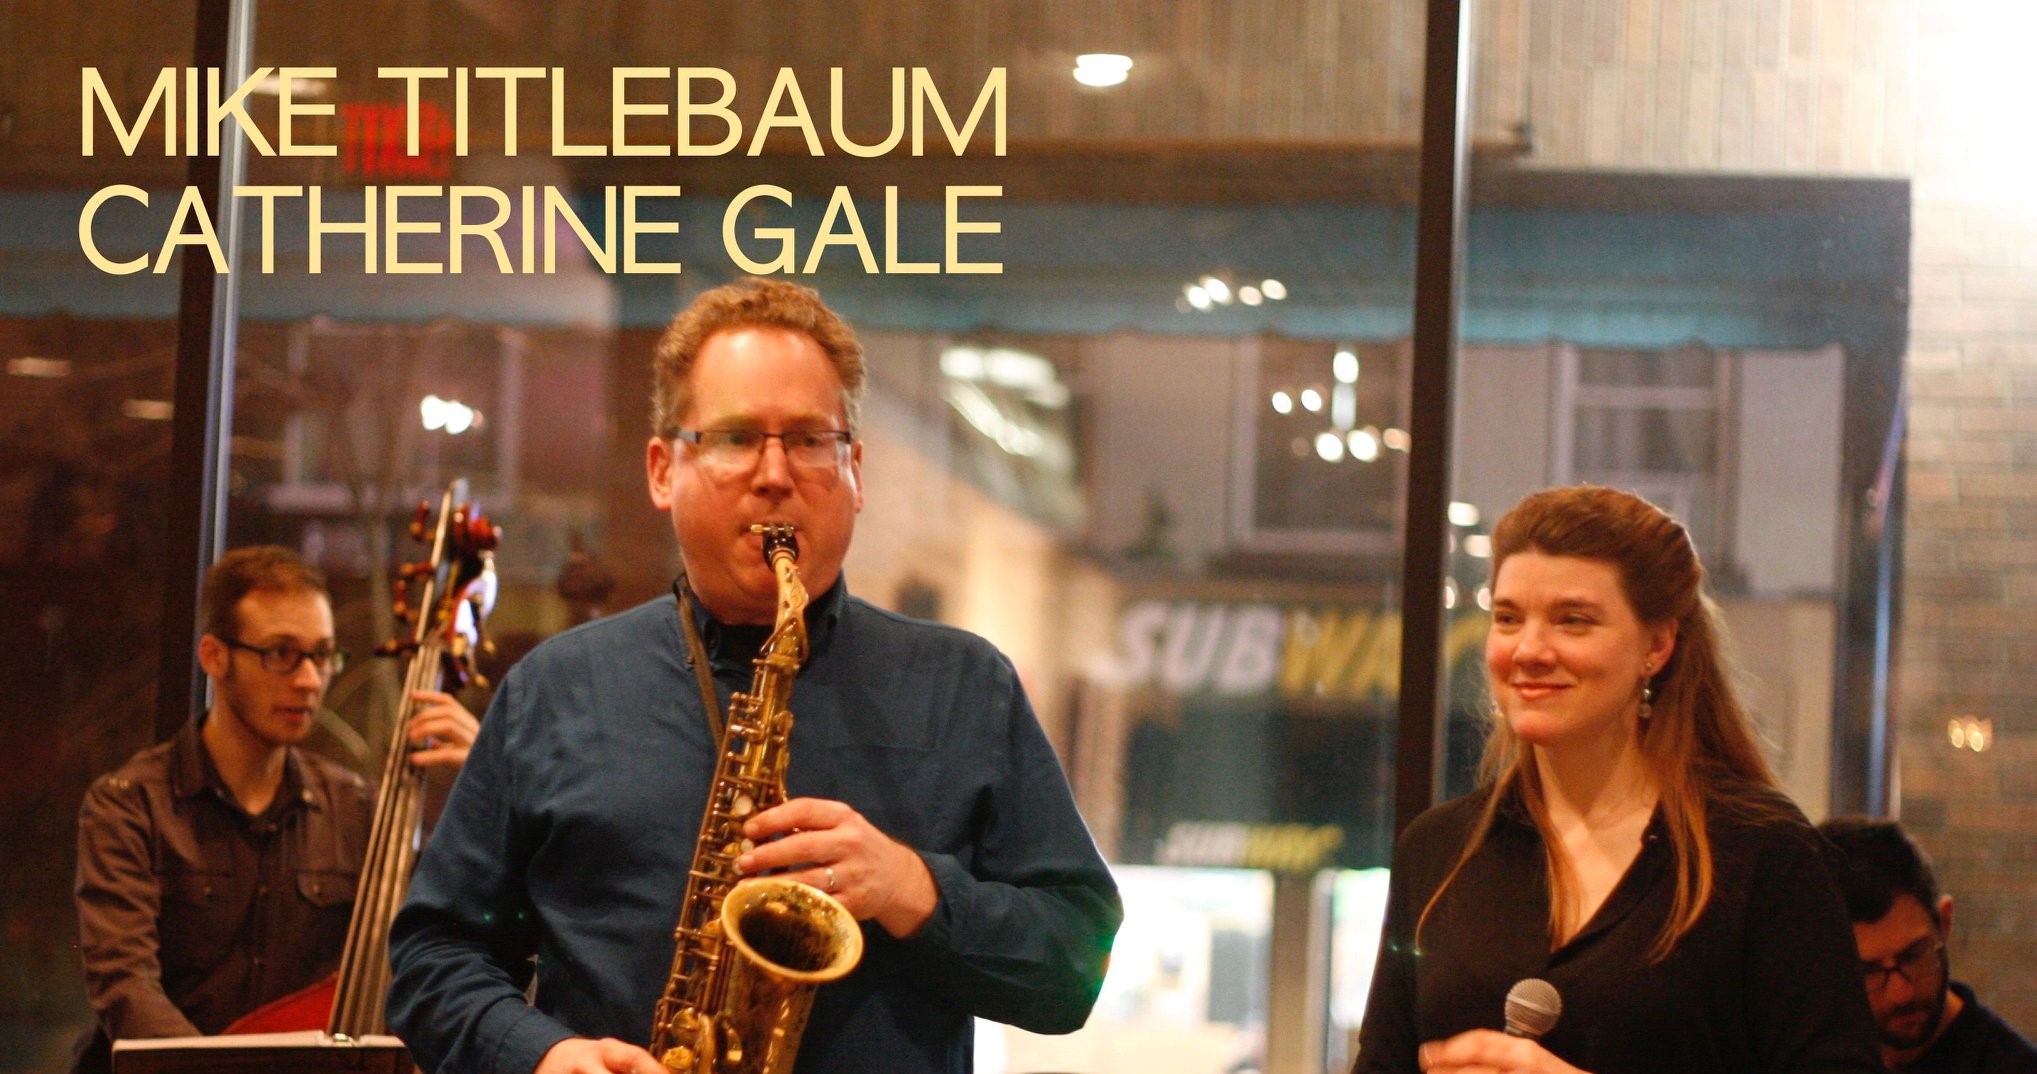 mike titlebaum and catherine gale